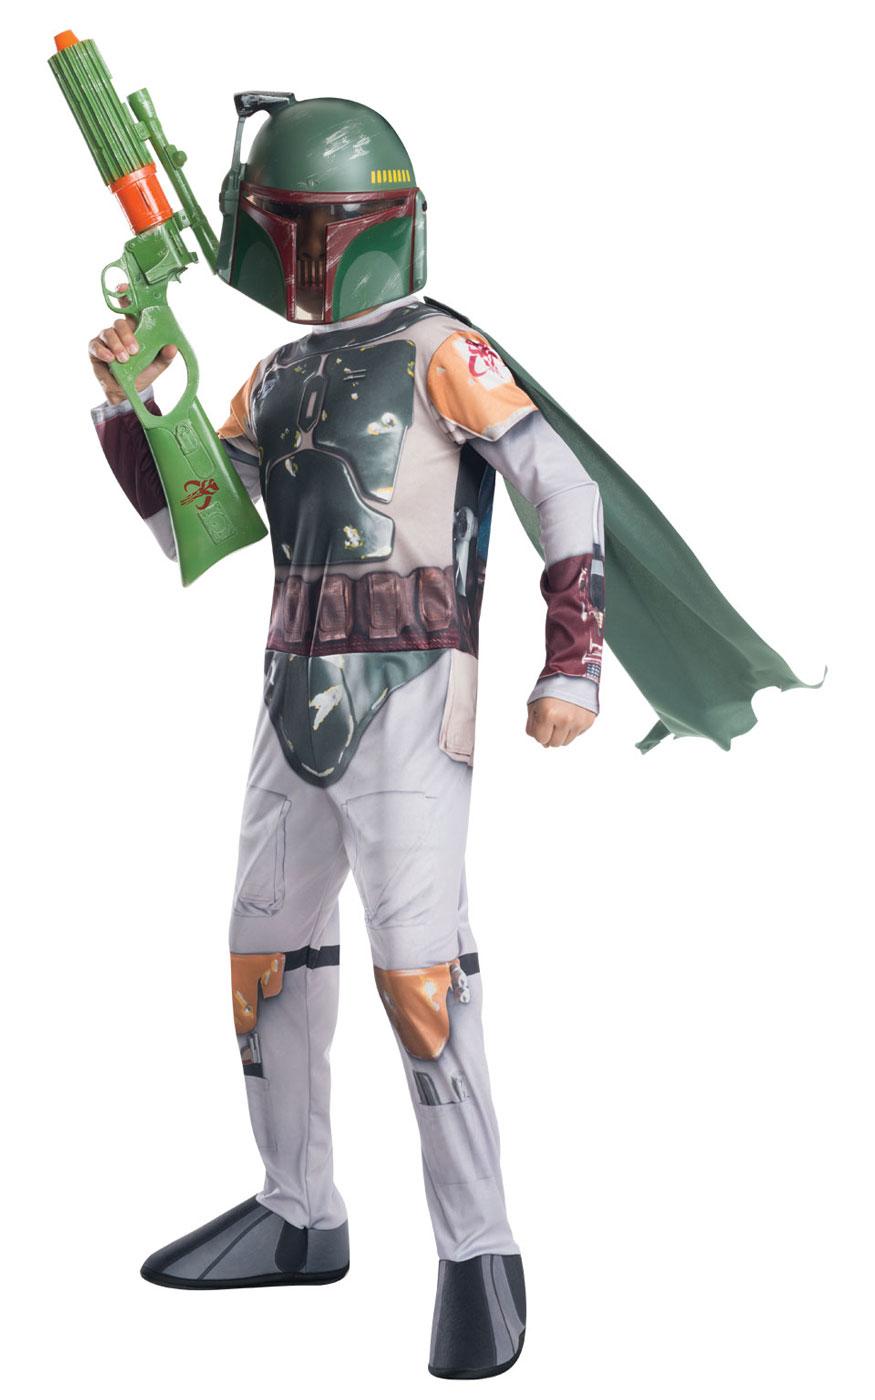 Licensed Star Wars Boba Fett Fancy Dress Costume for Children by Rubiies 610701 avalable here at Karnival Costumes online party shop